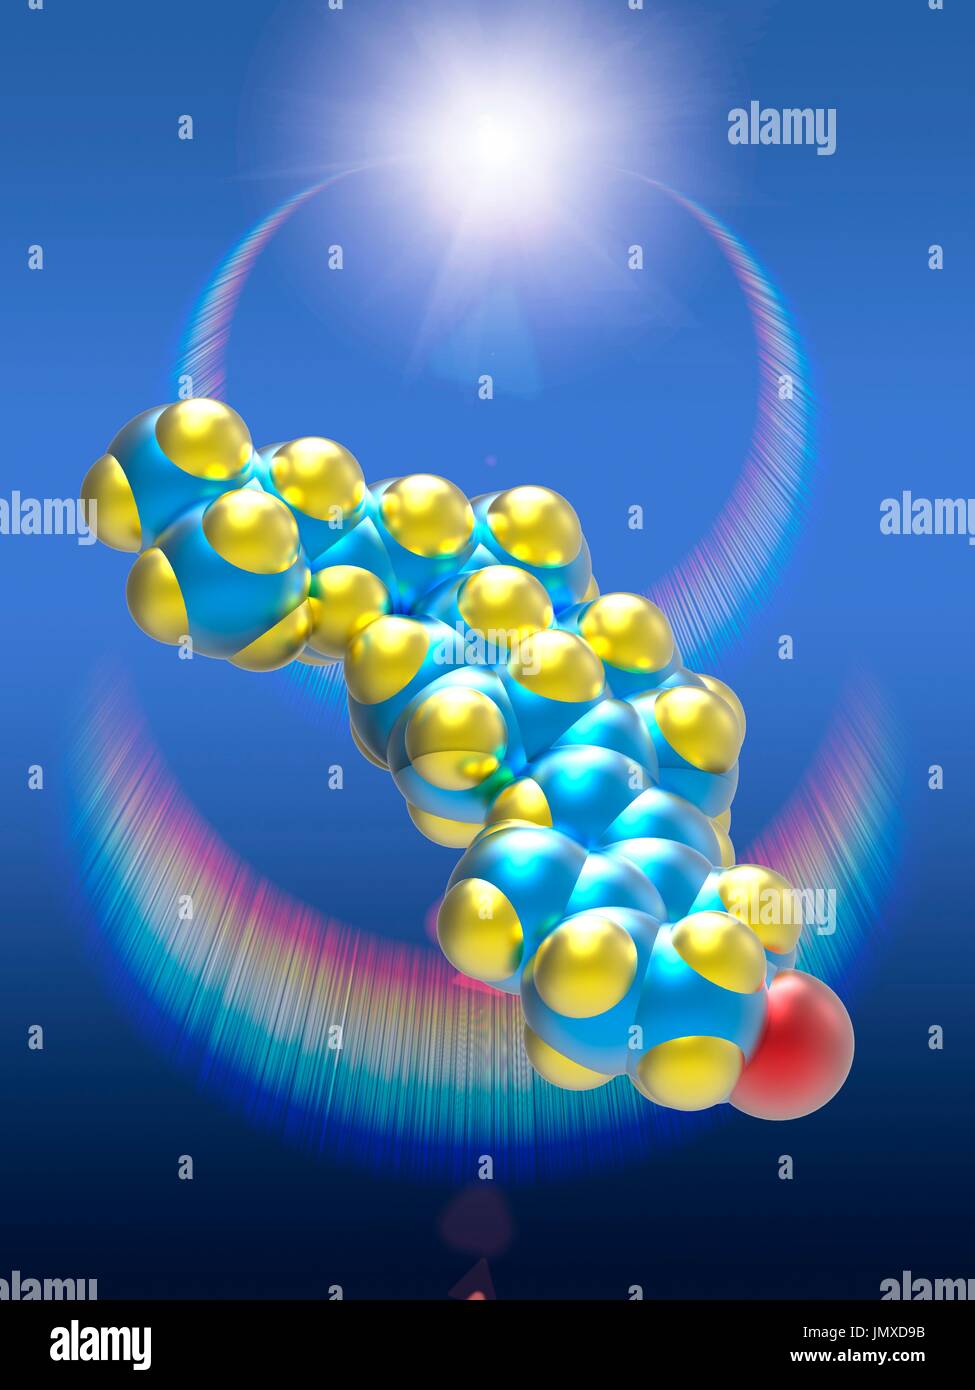 A molecular model of vitamin D3 (cholecalciferol), a form of vitamin D synthesized in the skin as a result of ultraviolet B light. Vitamin D3 plays a role in calcium absorption to maintain strong bones and balance levels of calcium and phosphorus in the blood. Atoms are coloured blue (carbon), yellow (hydrogen), and red (oxygen). In the background a sun flare with chromatic reflections. Stock Photo